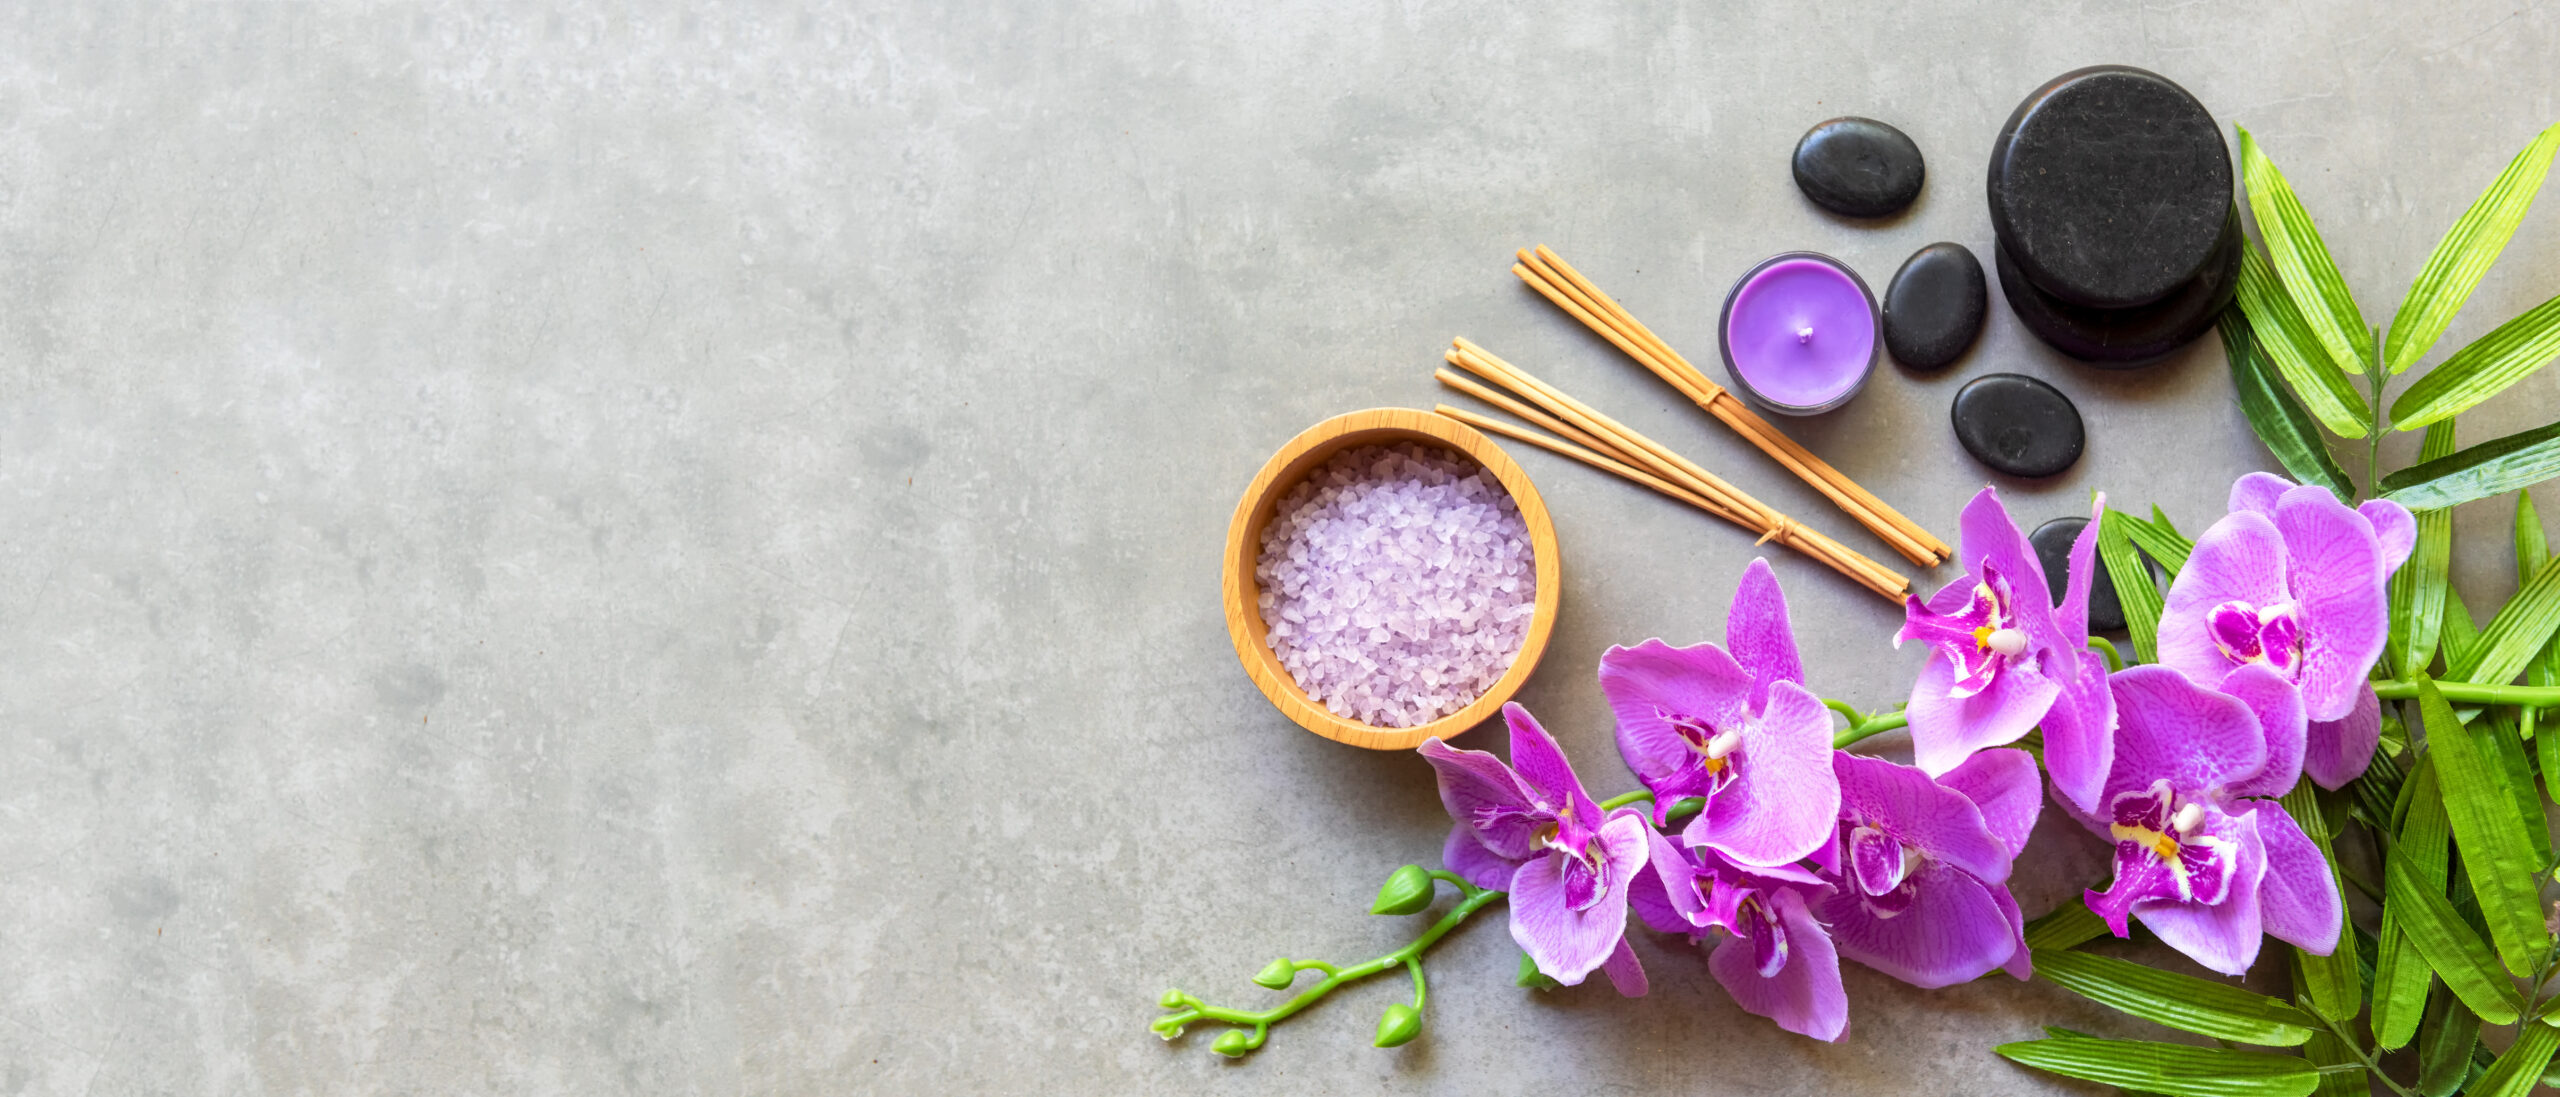 Thai Spa Treatments Aroma Therapy Salt And Sugar Scrub Massage With Purple Orchid Flower On Backboard With Candle. Thailand. Healthy Concept. Copy Space For Banner, Top View